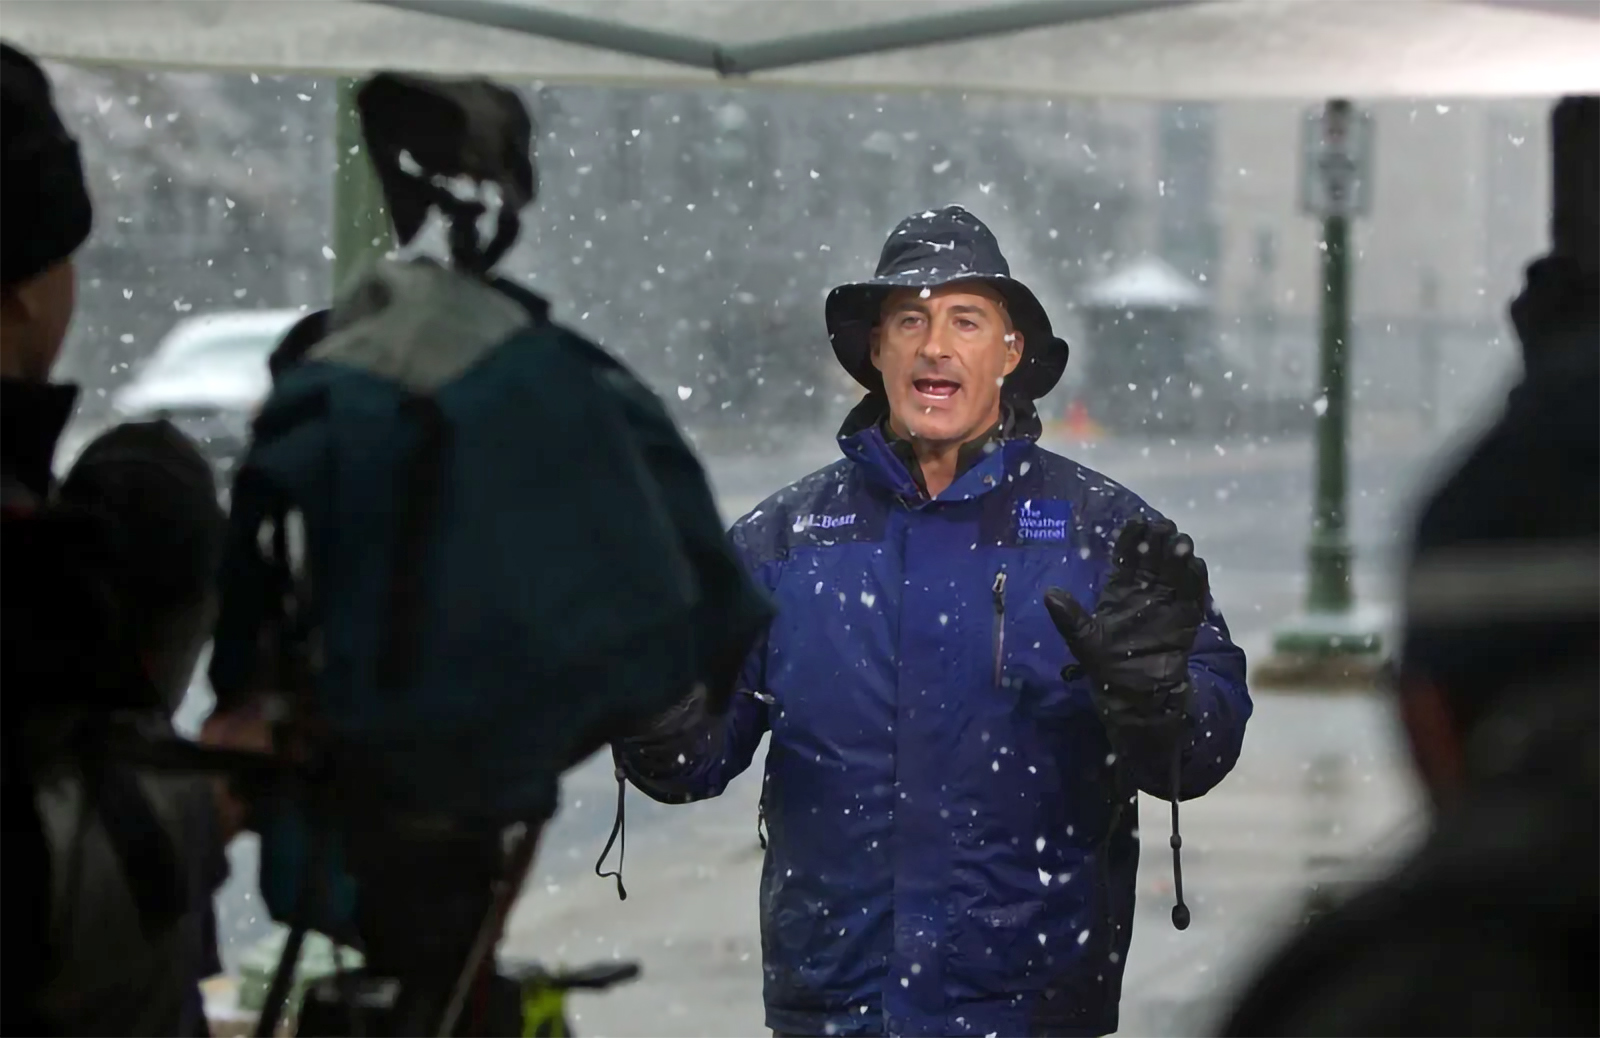 Jim Cantore reporting for the Weather Channel